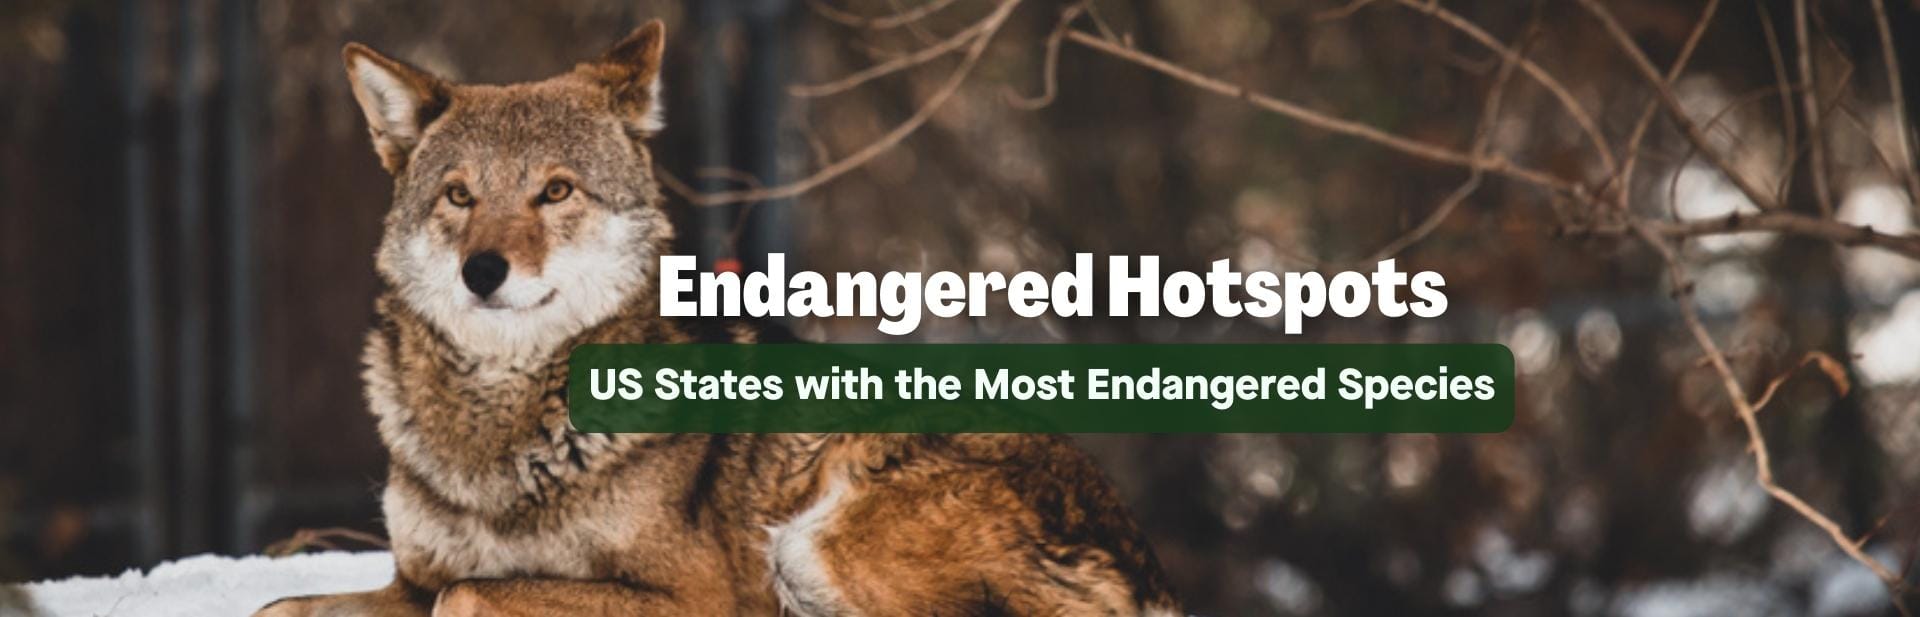 Endangered Hotspots: US States with the Most Endangered Species